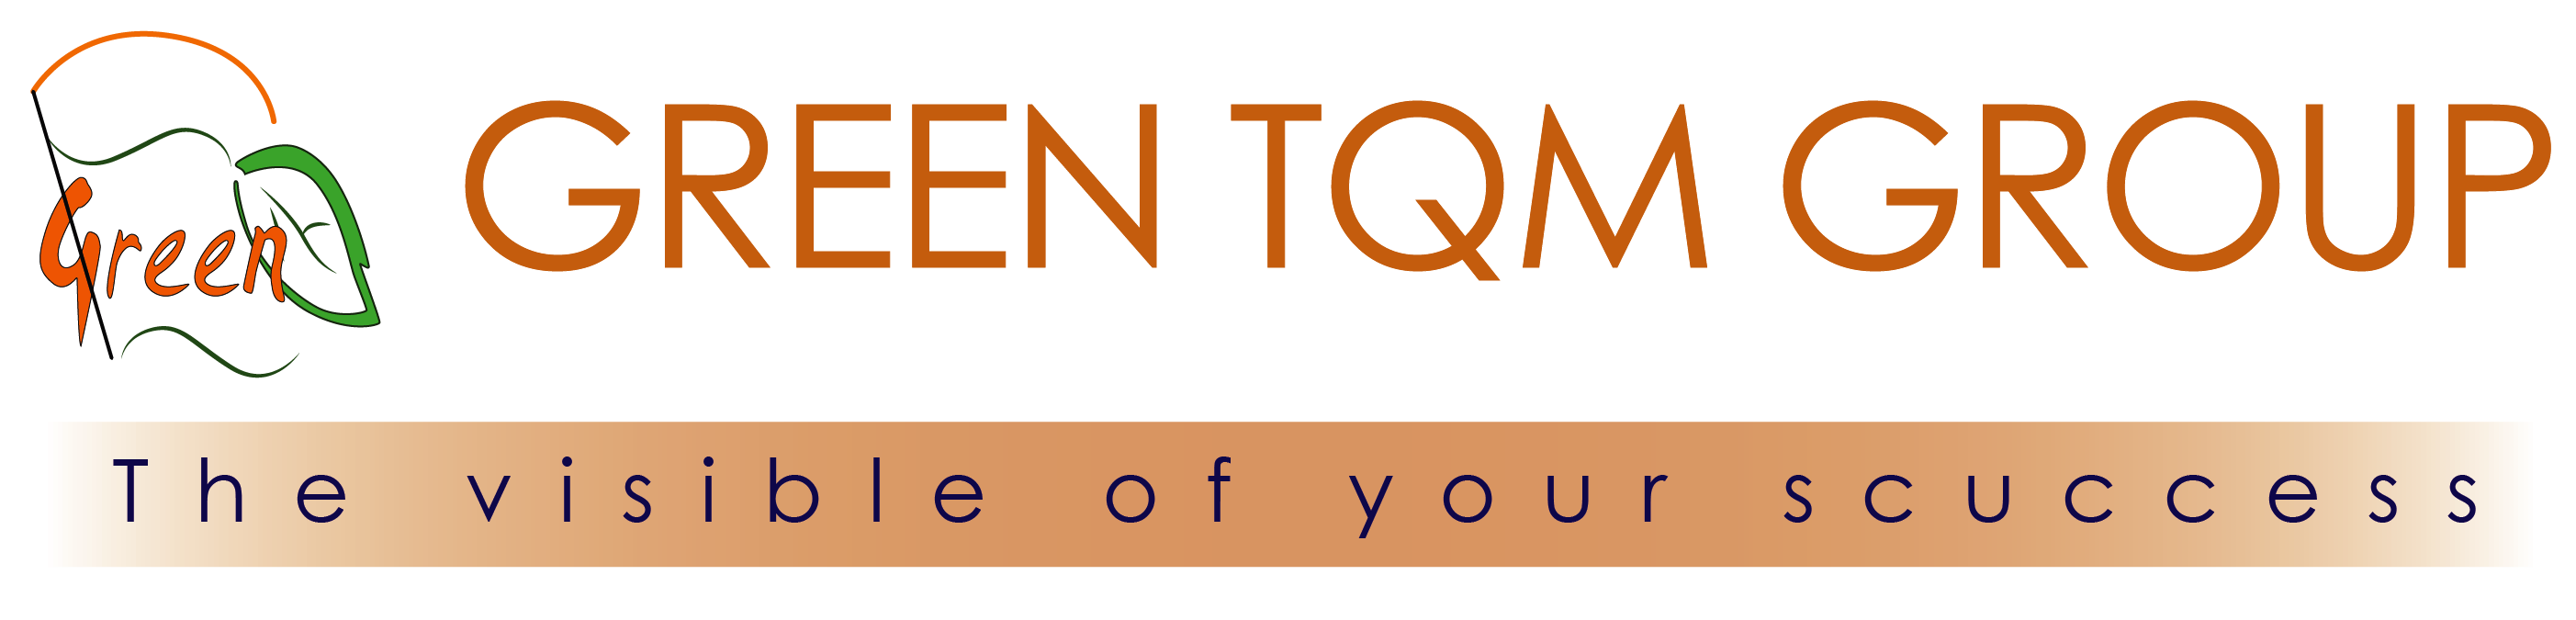 Green TQM Consultancy and Training - Vio by V Way Infotech